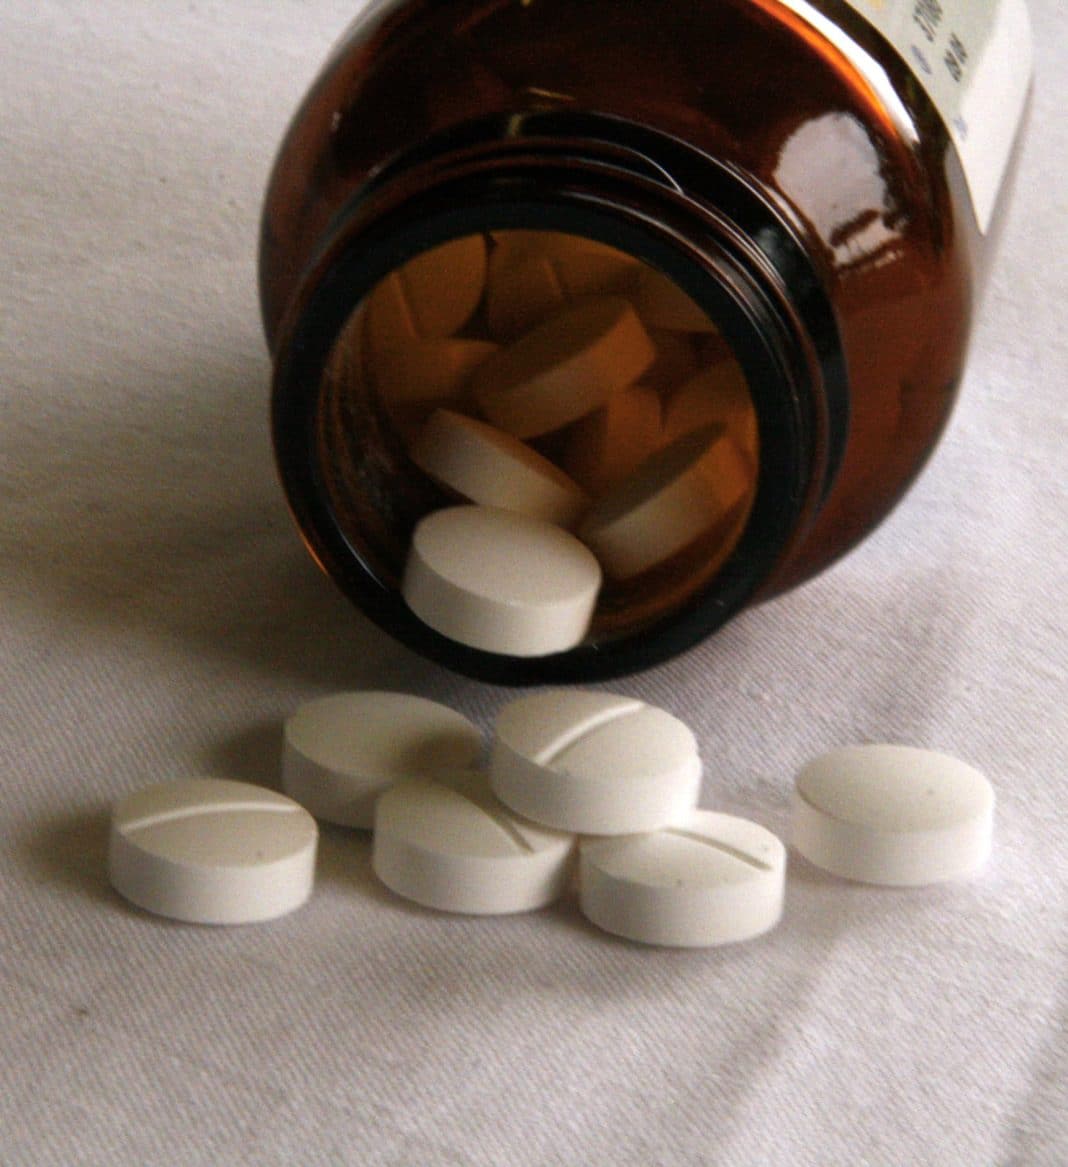 Tablets fall from a jar of medication